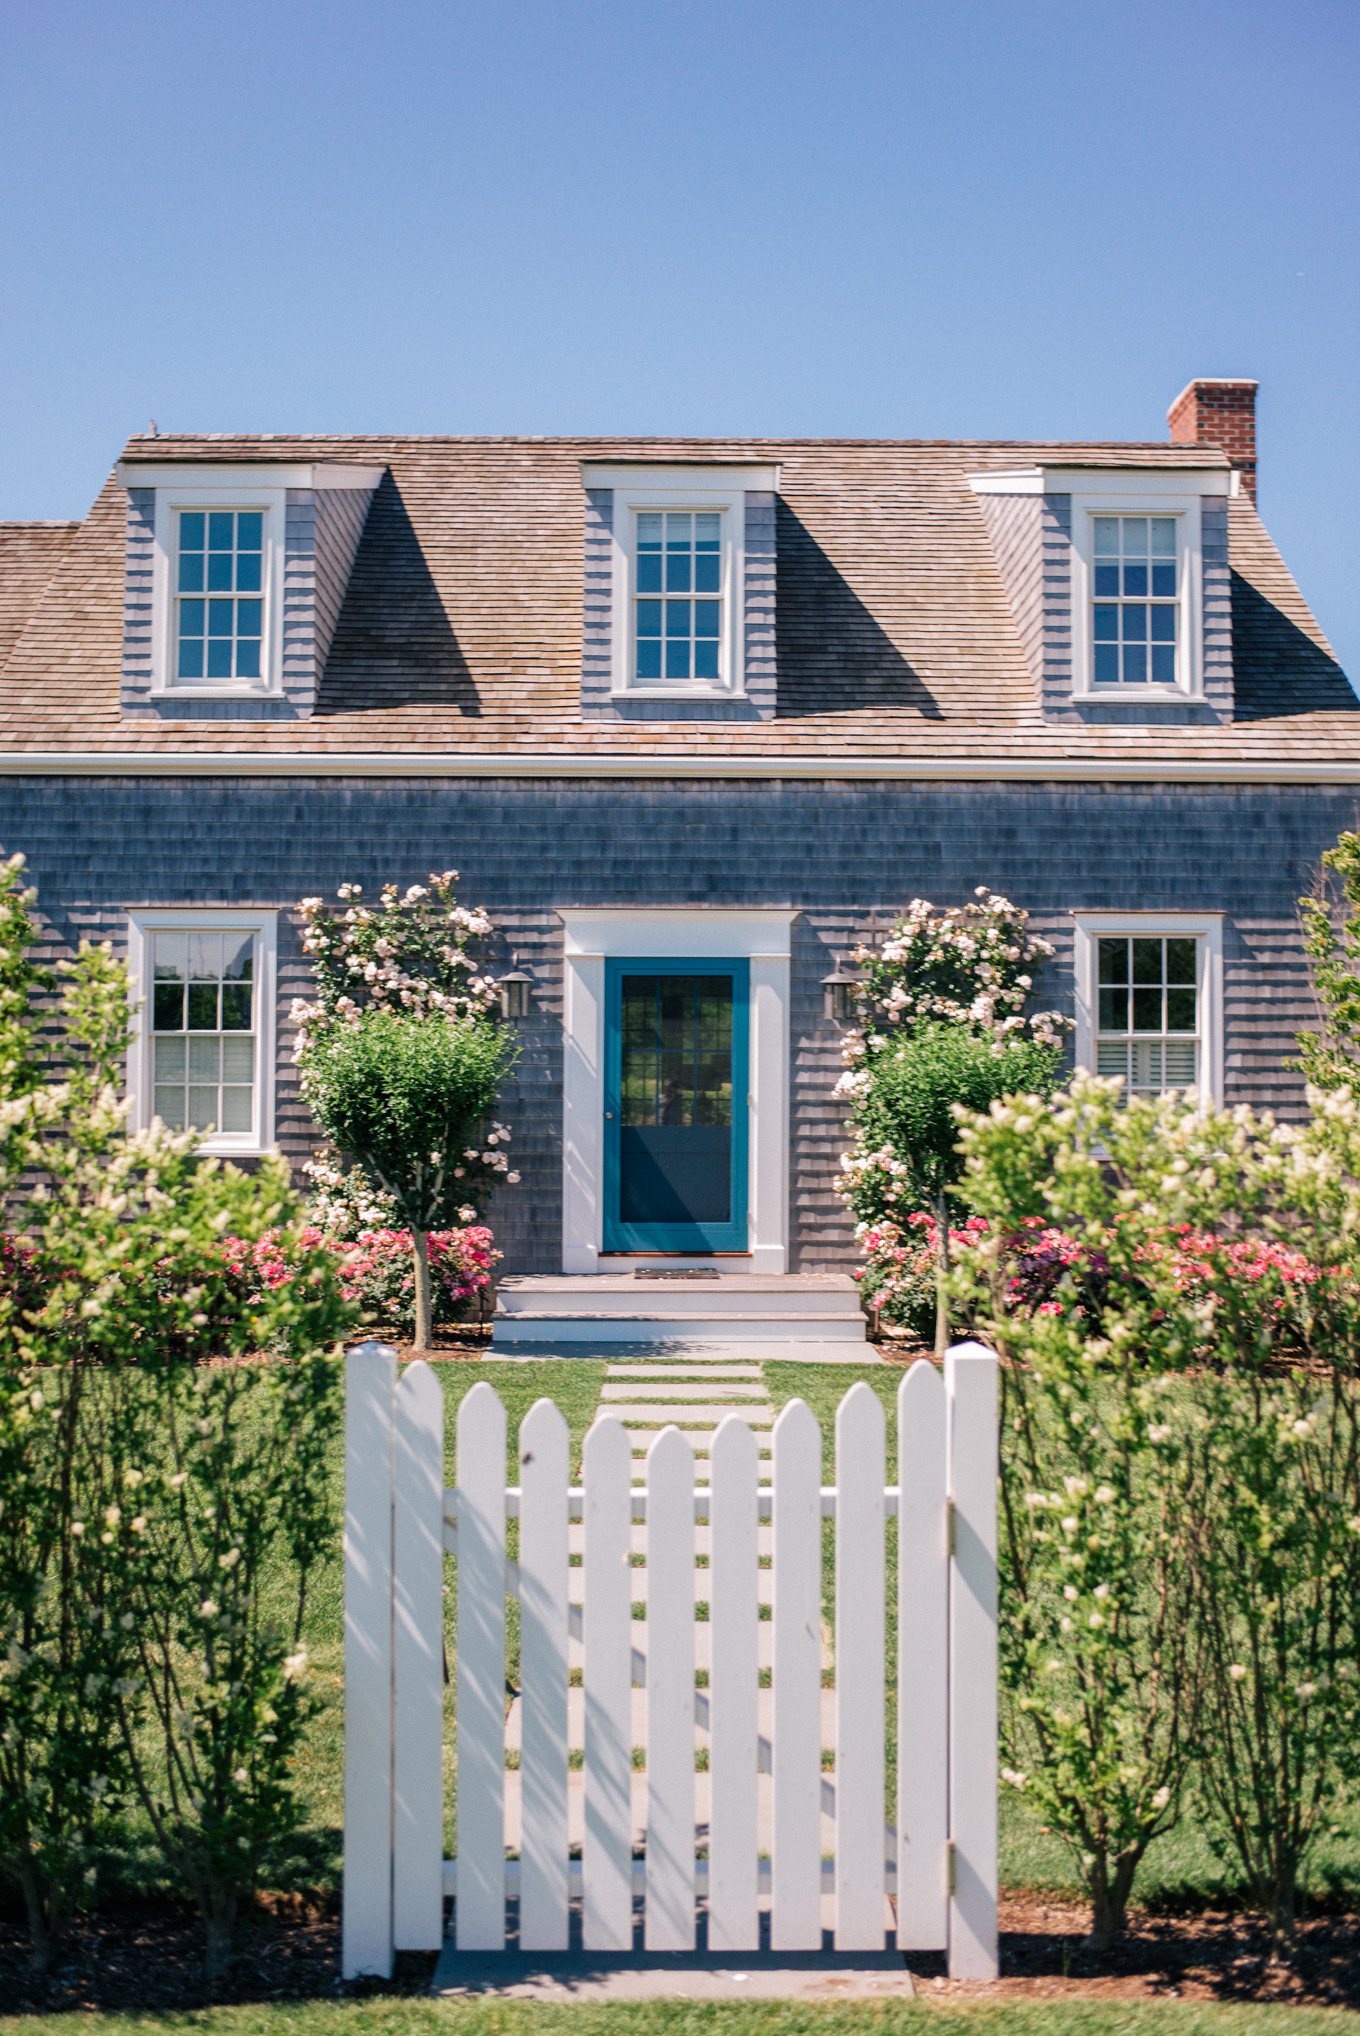 gmg-a-week-on-nantucket-part-two-1009145